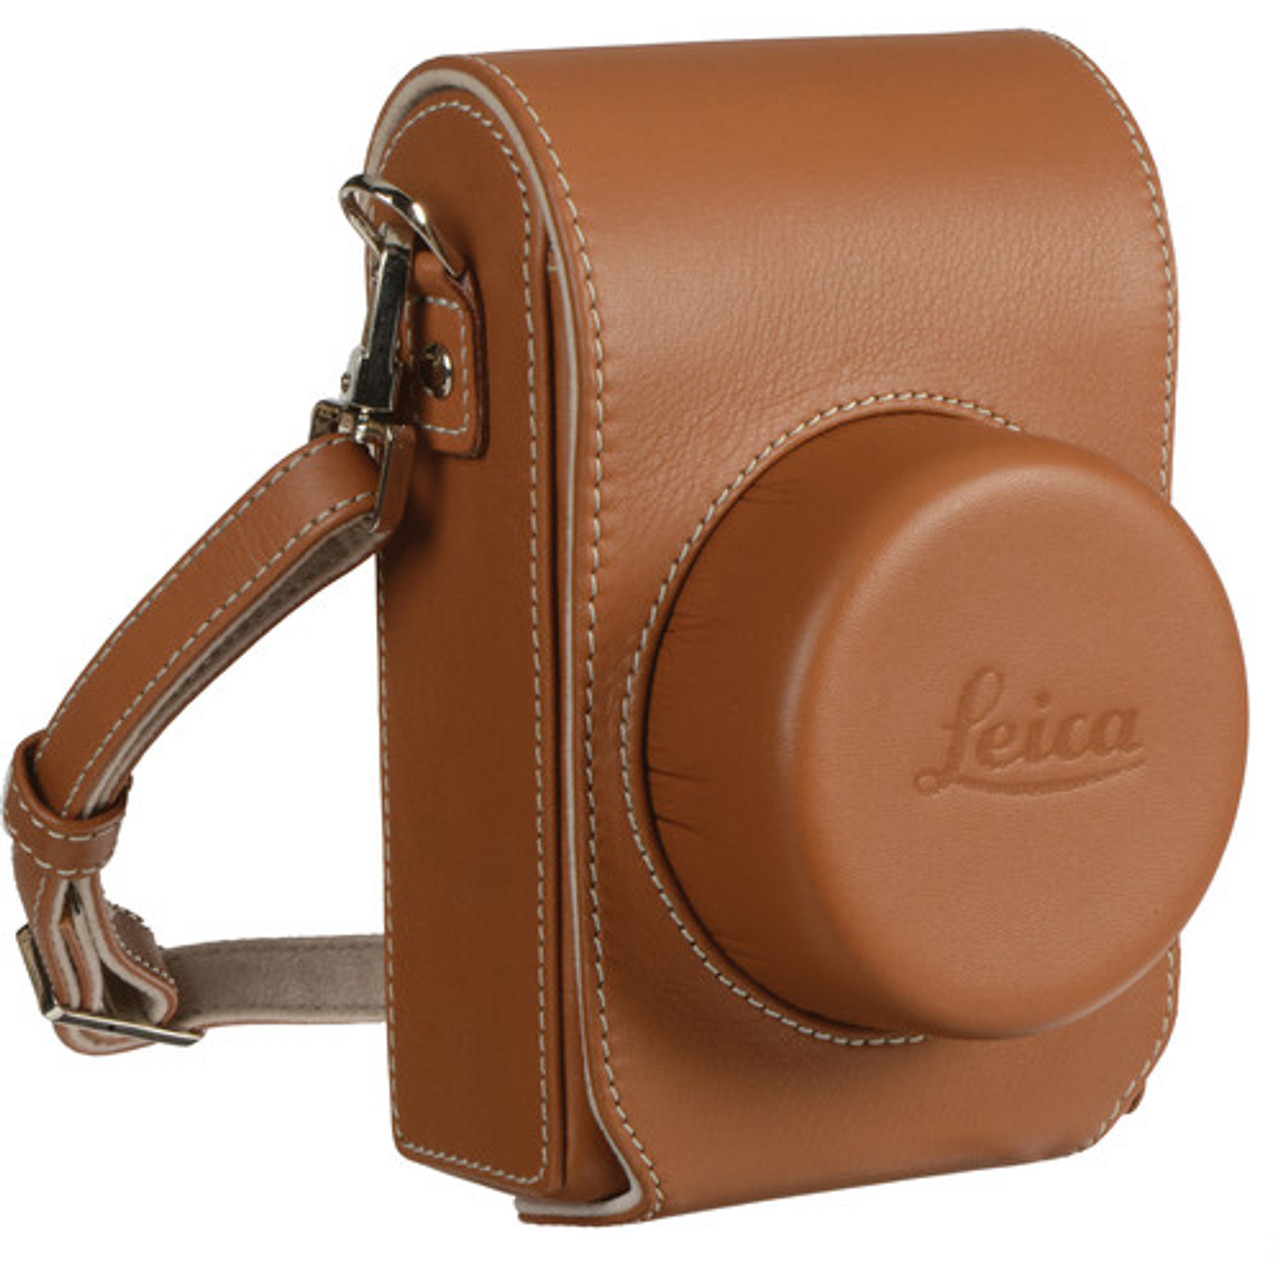 Leica Leather Camera Jacket Case for D-Lux Typ 109 (Cognac) at